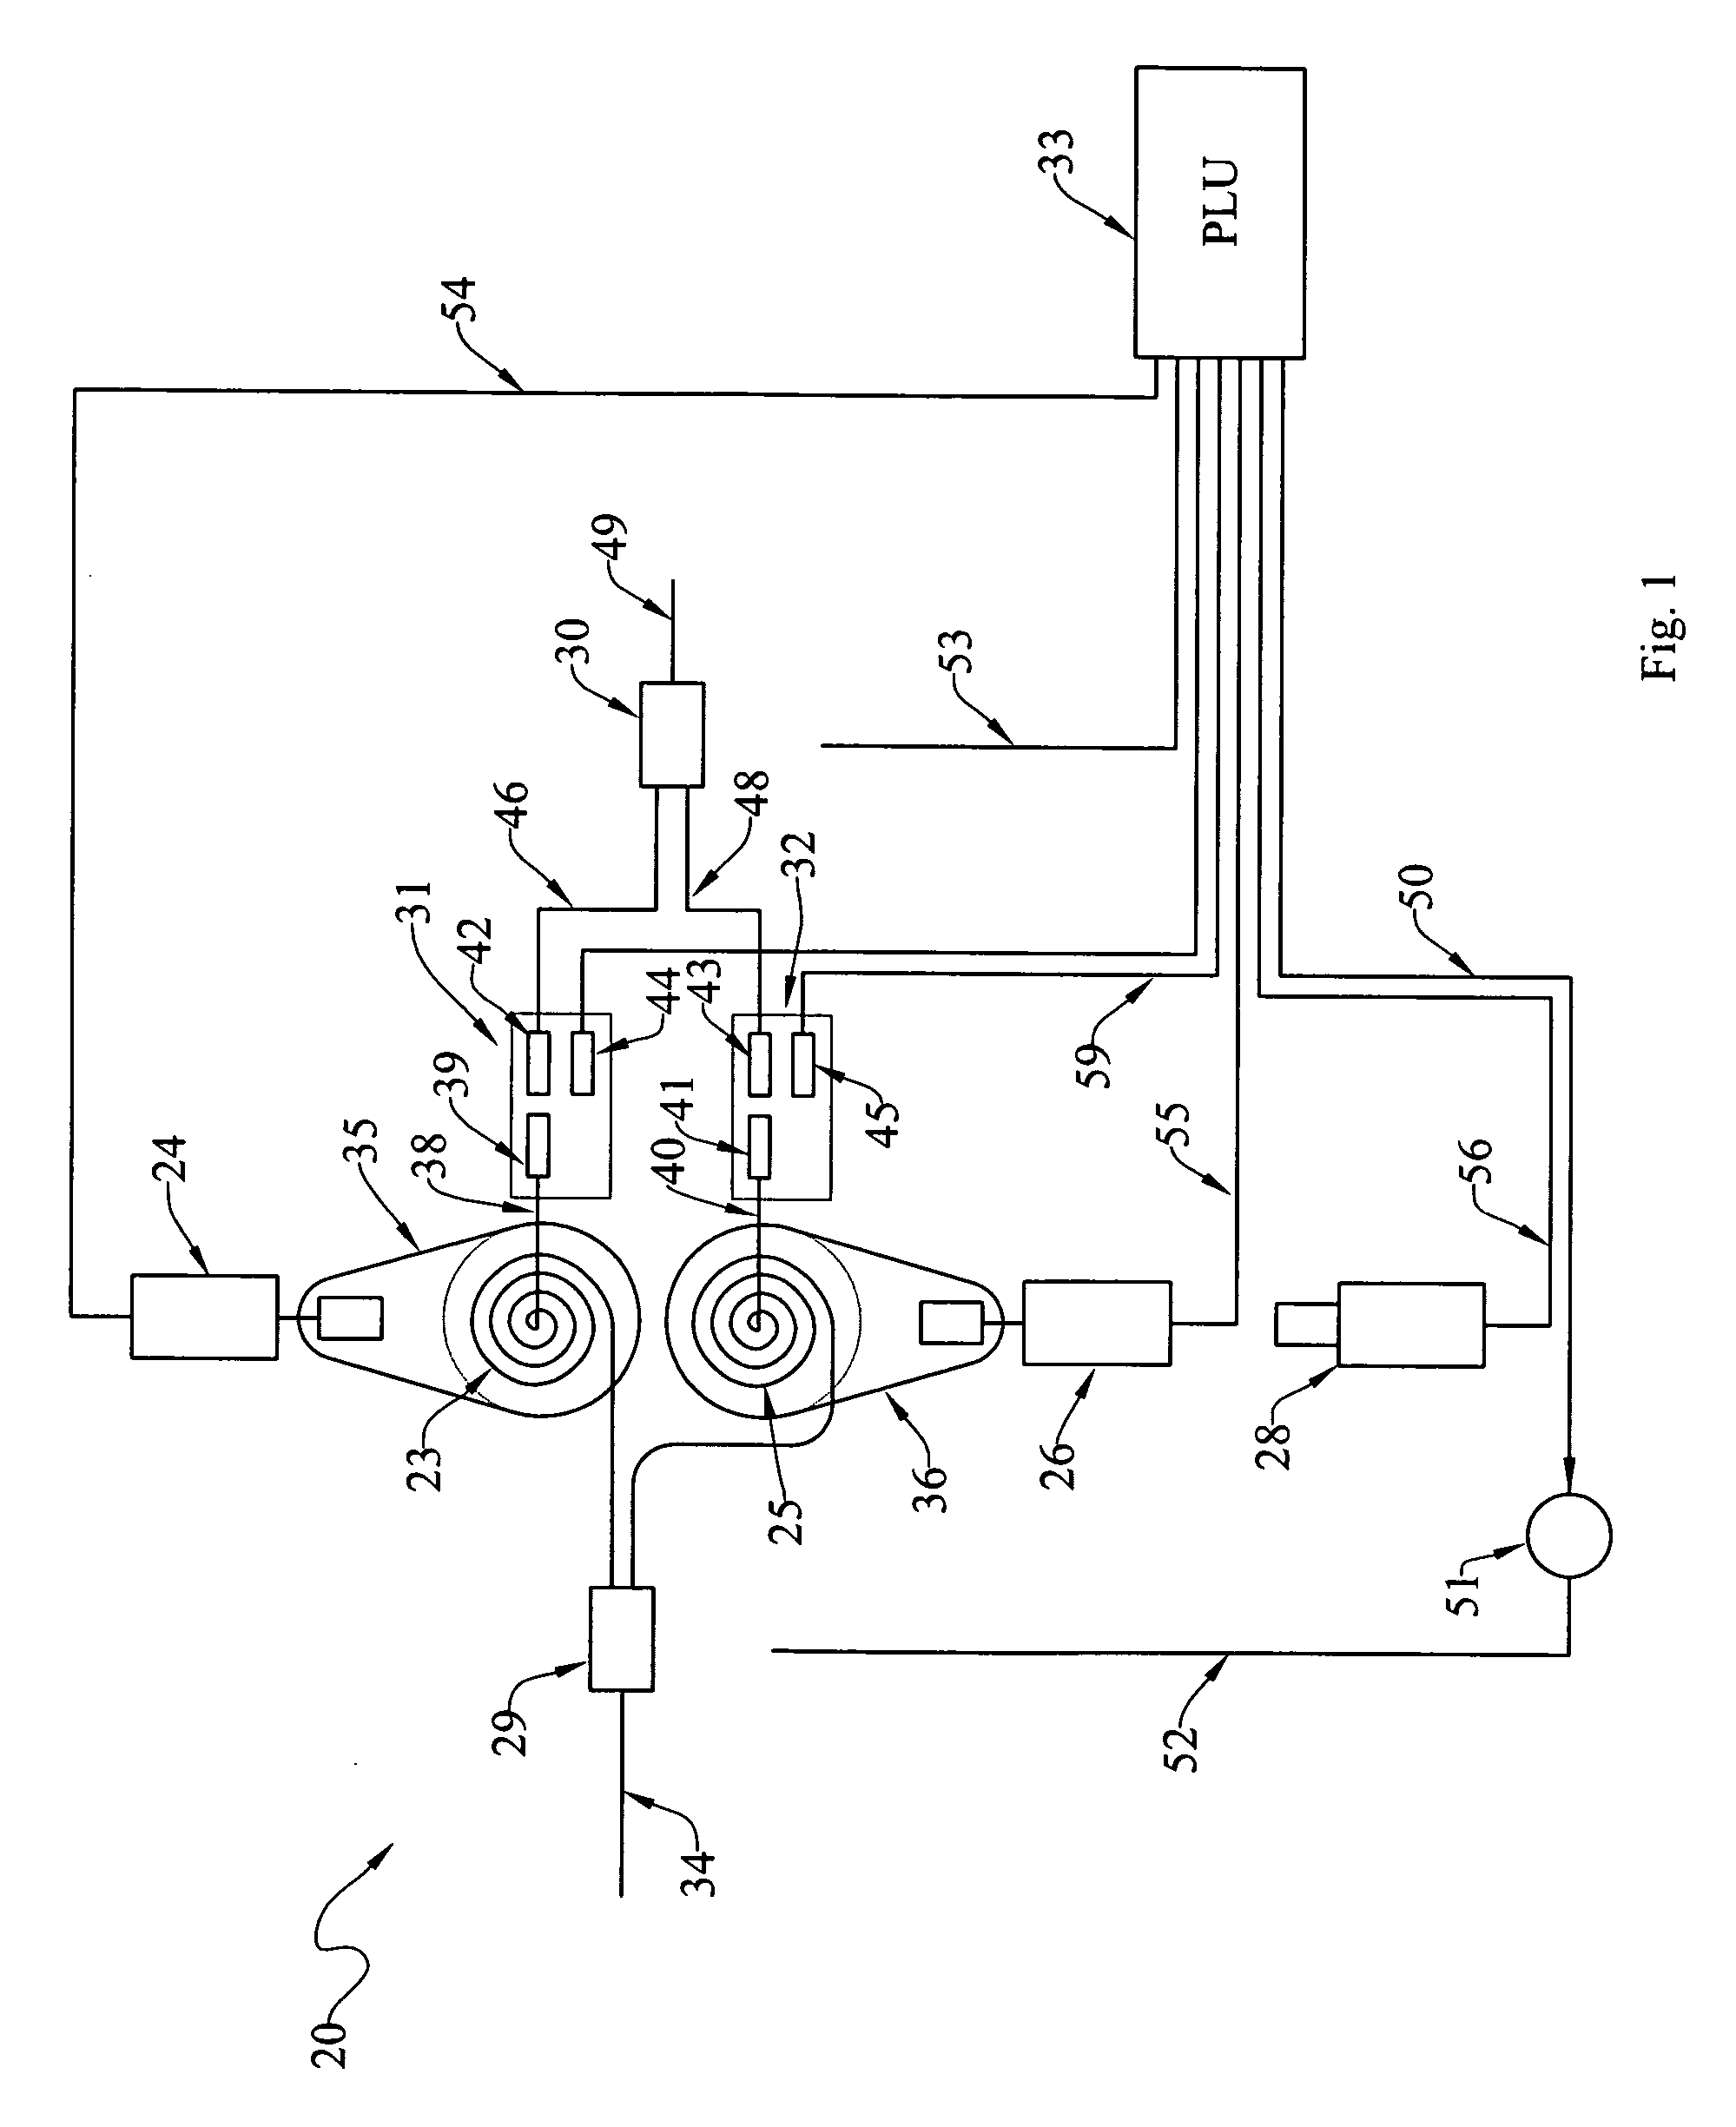 Off-axis rotary joint